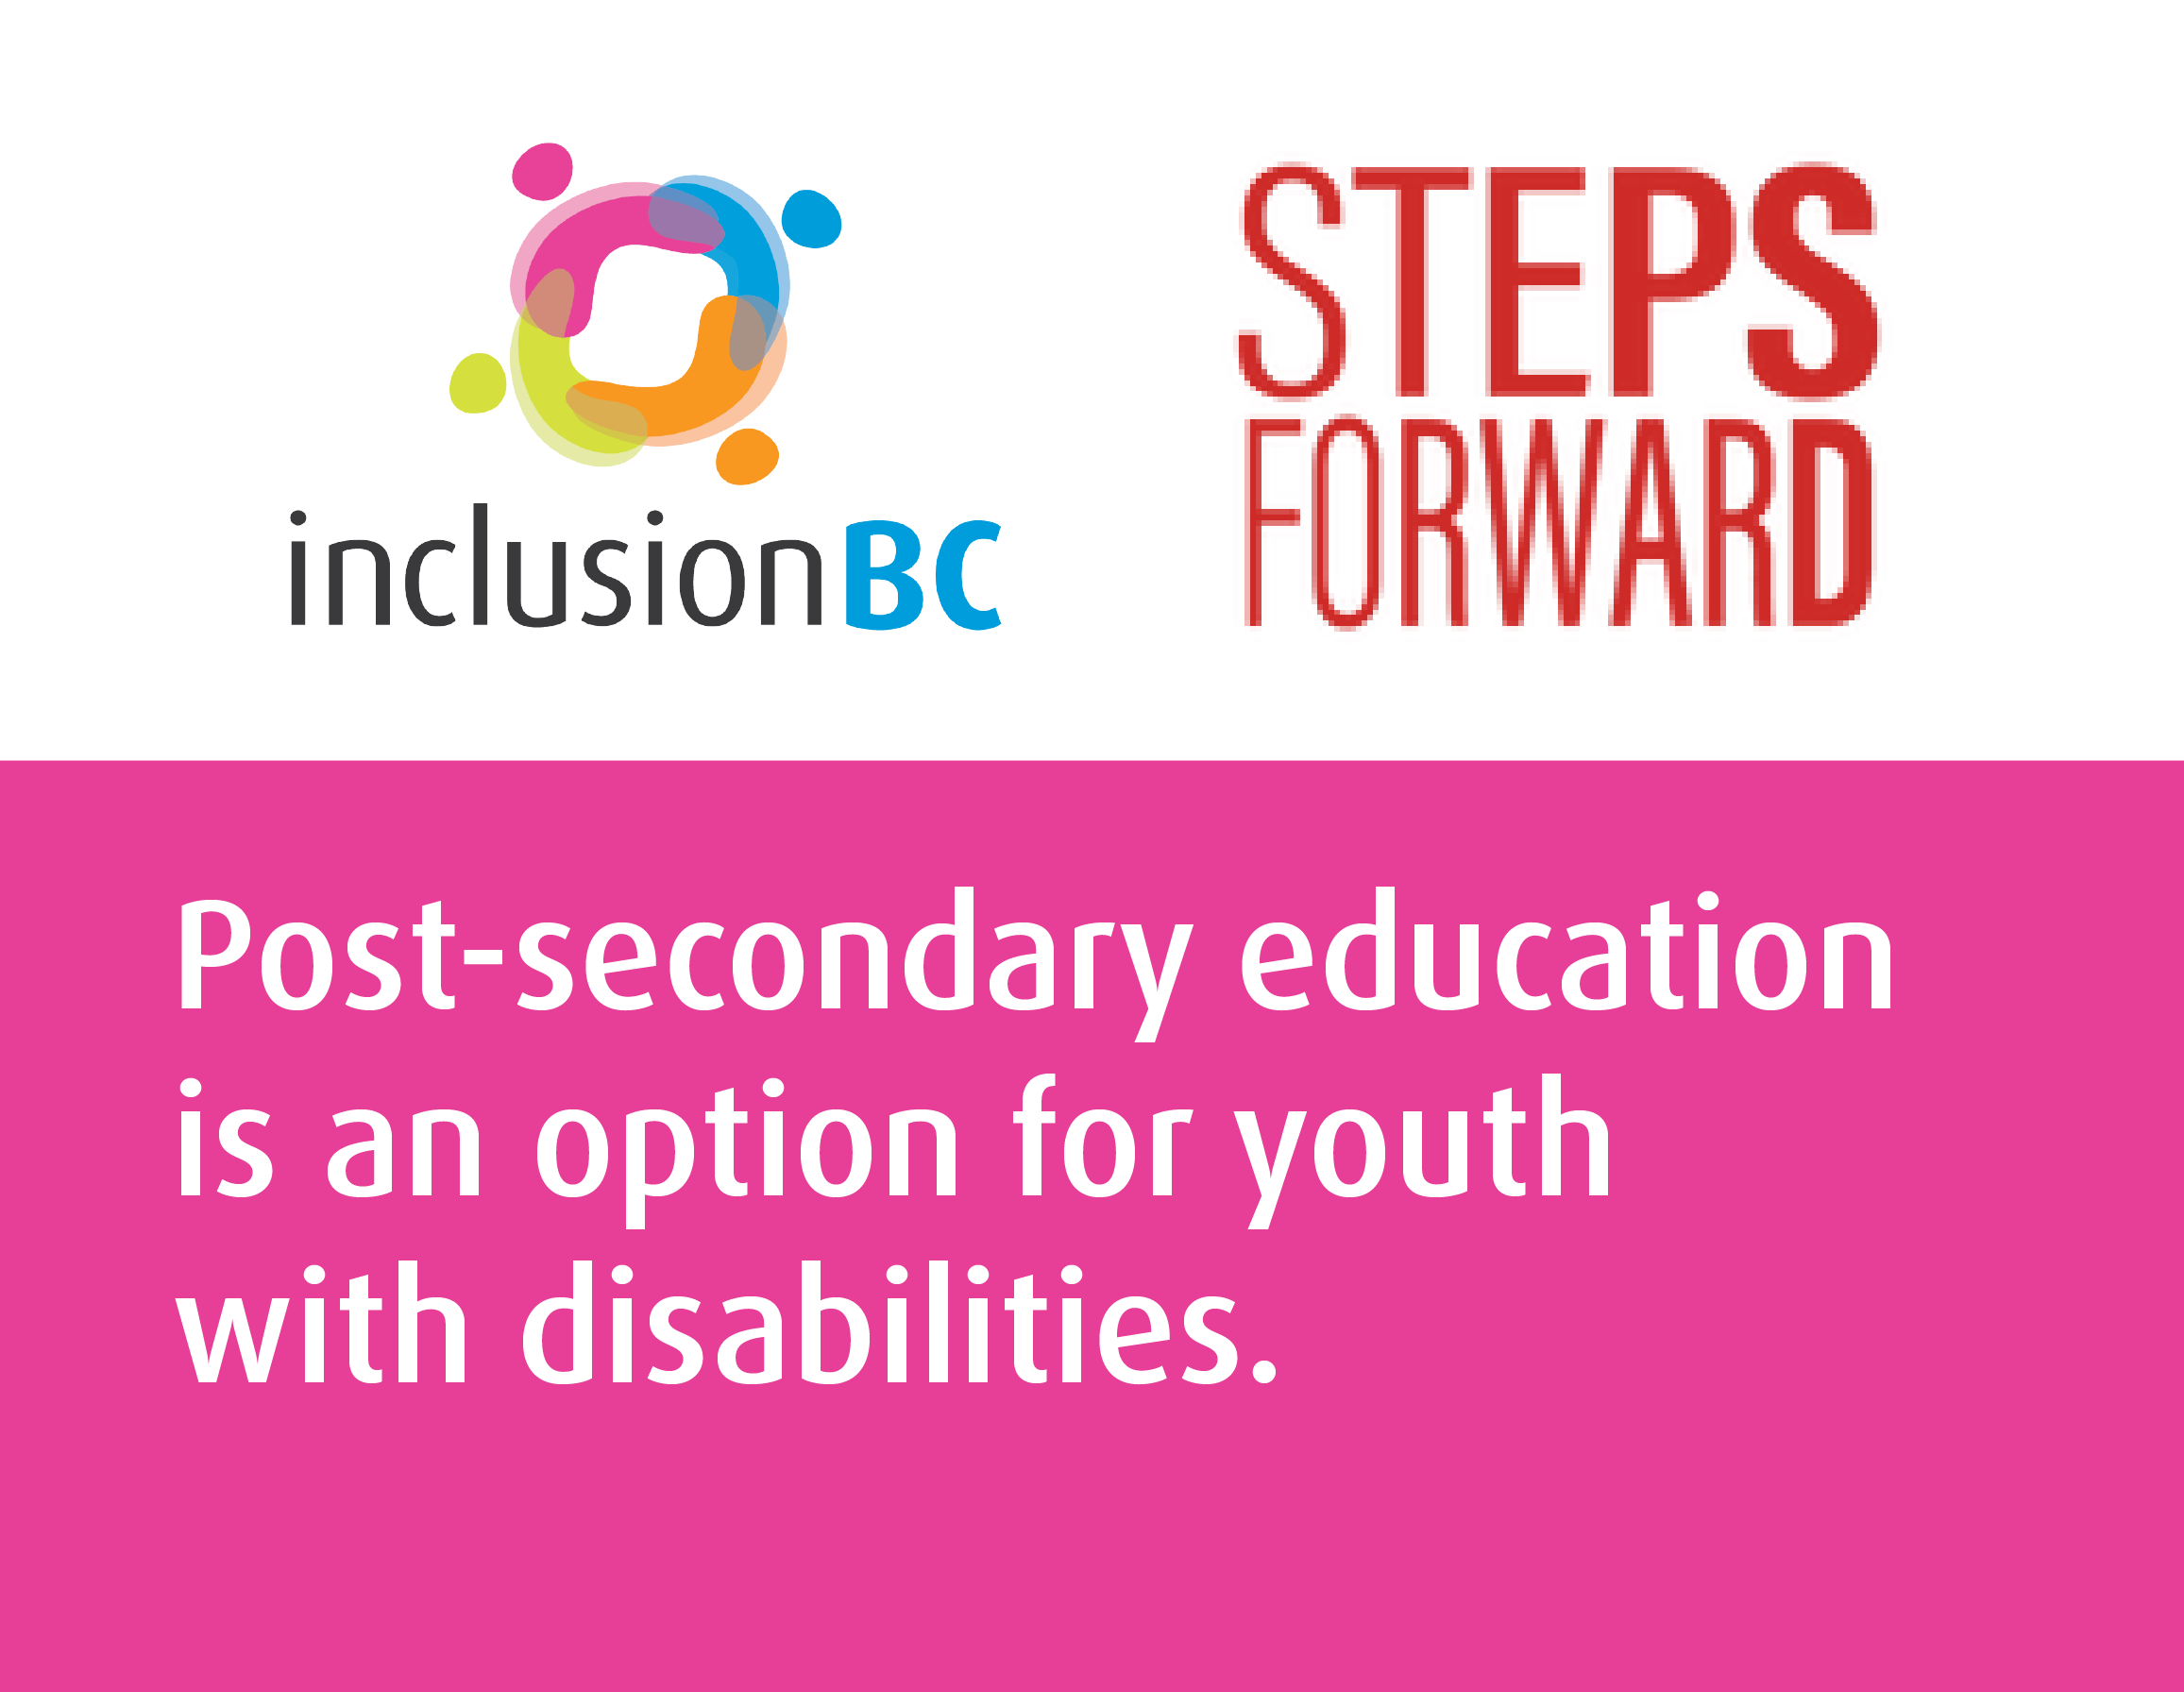 Post-secondary education is an option for youth with disabilities.